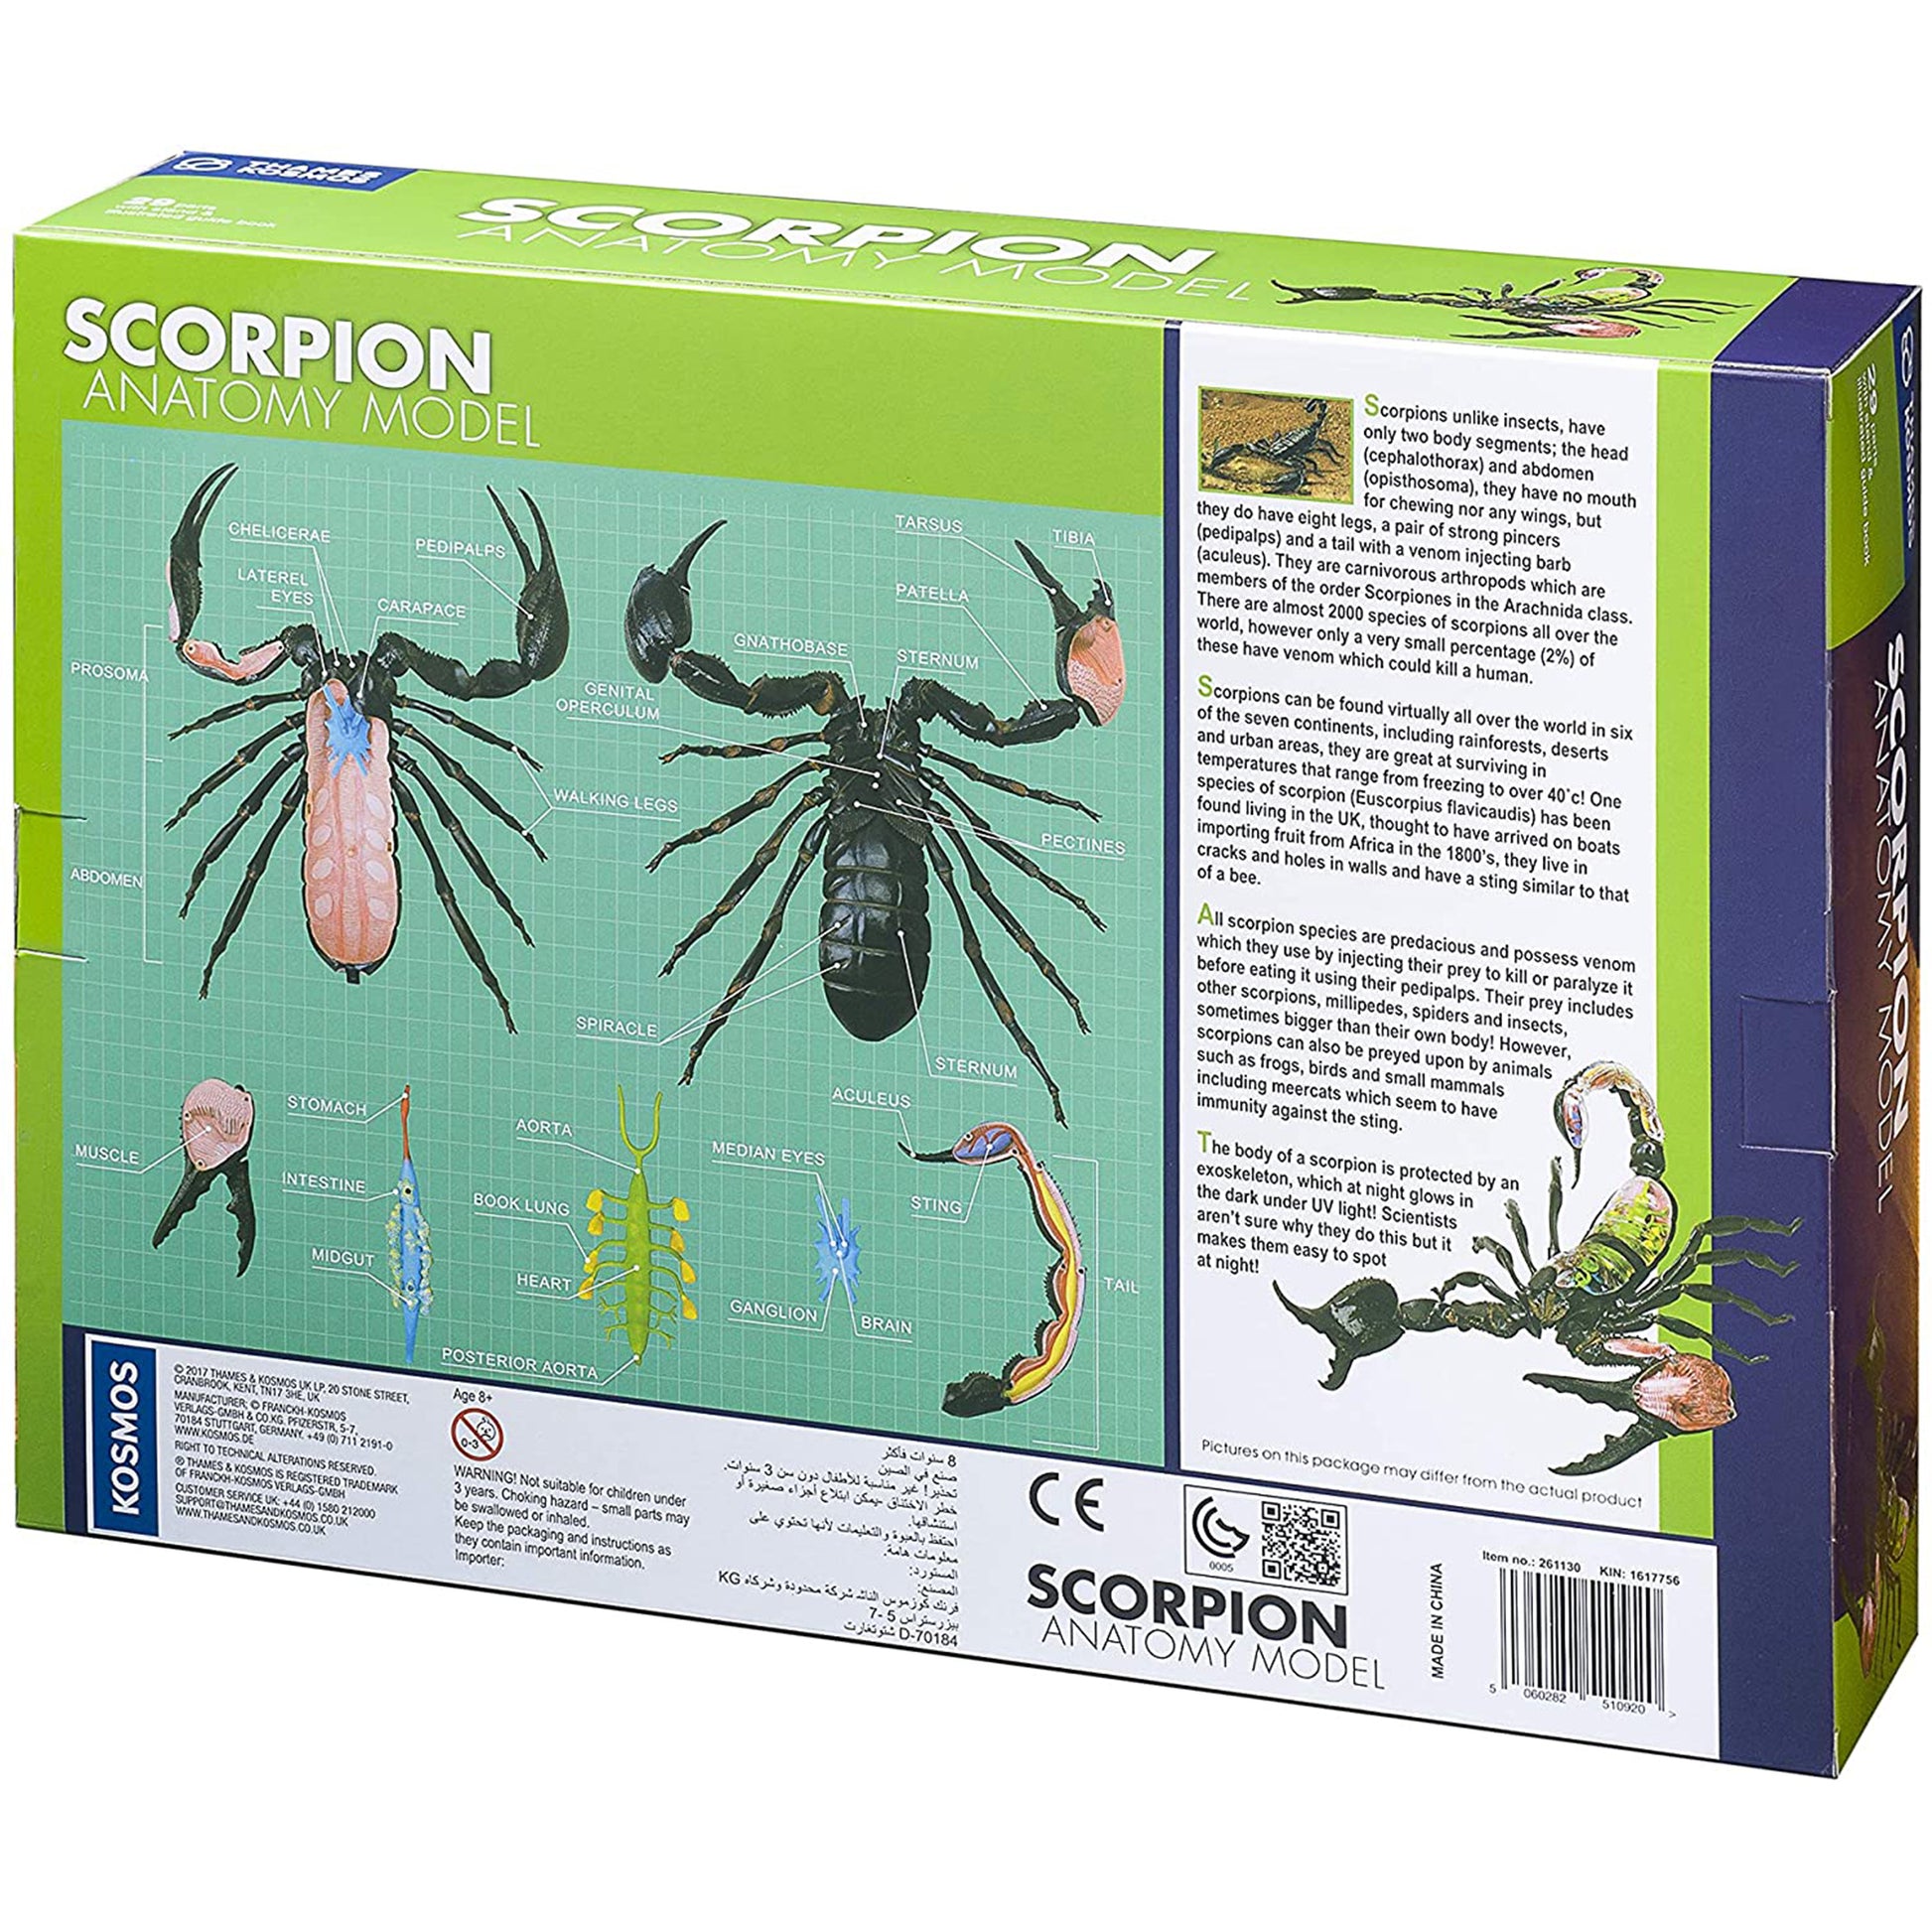 Scorpion Anatomy - 3D Anatomical Model in Packaging Back of Box | Happy Piranha